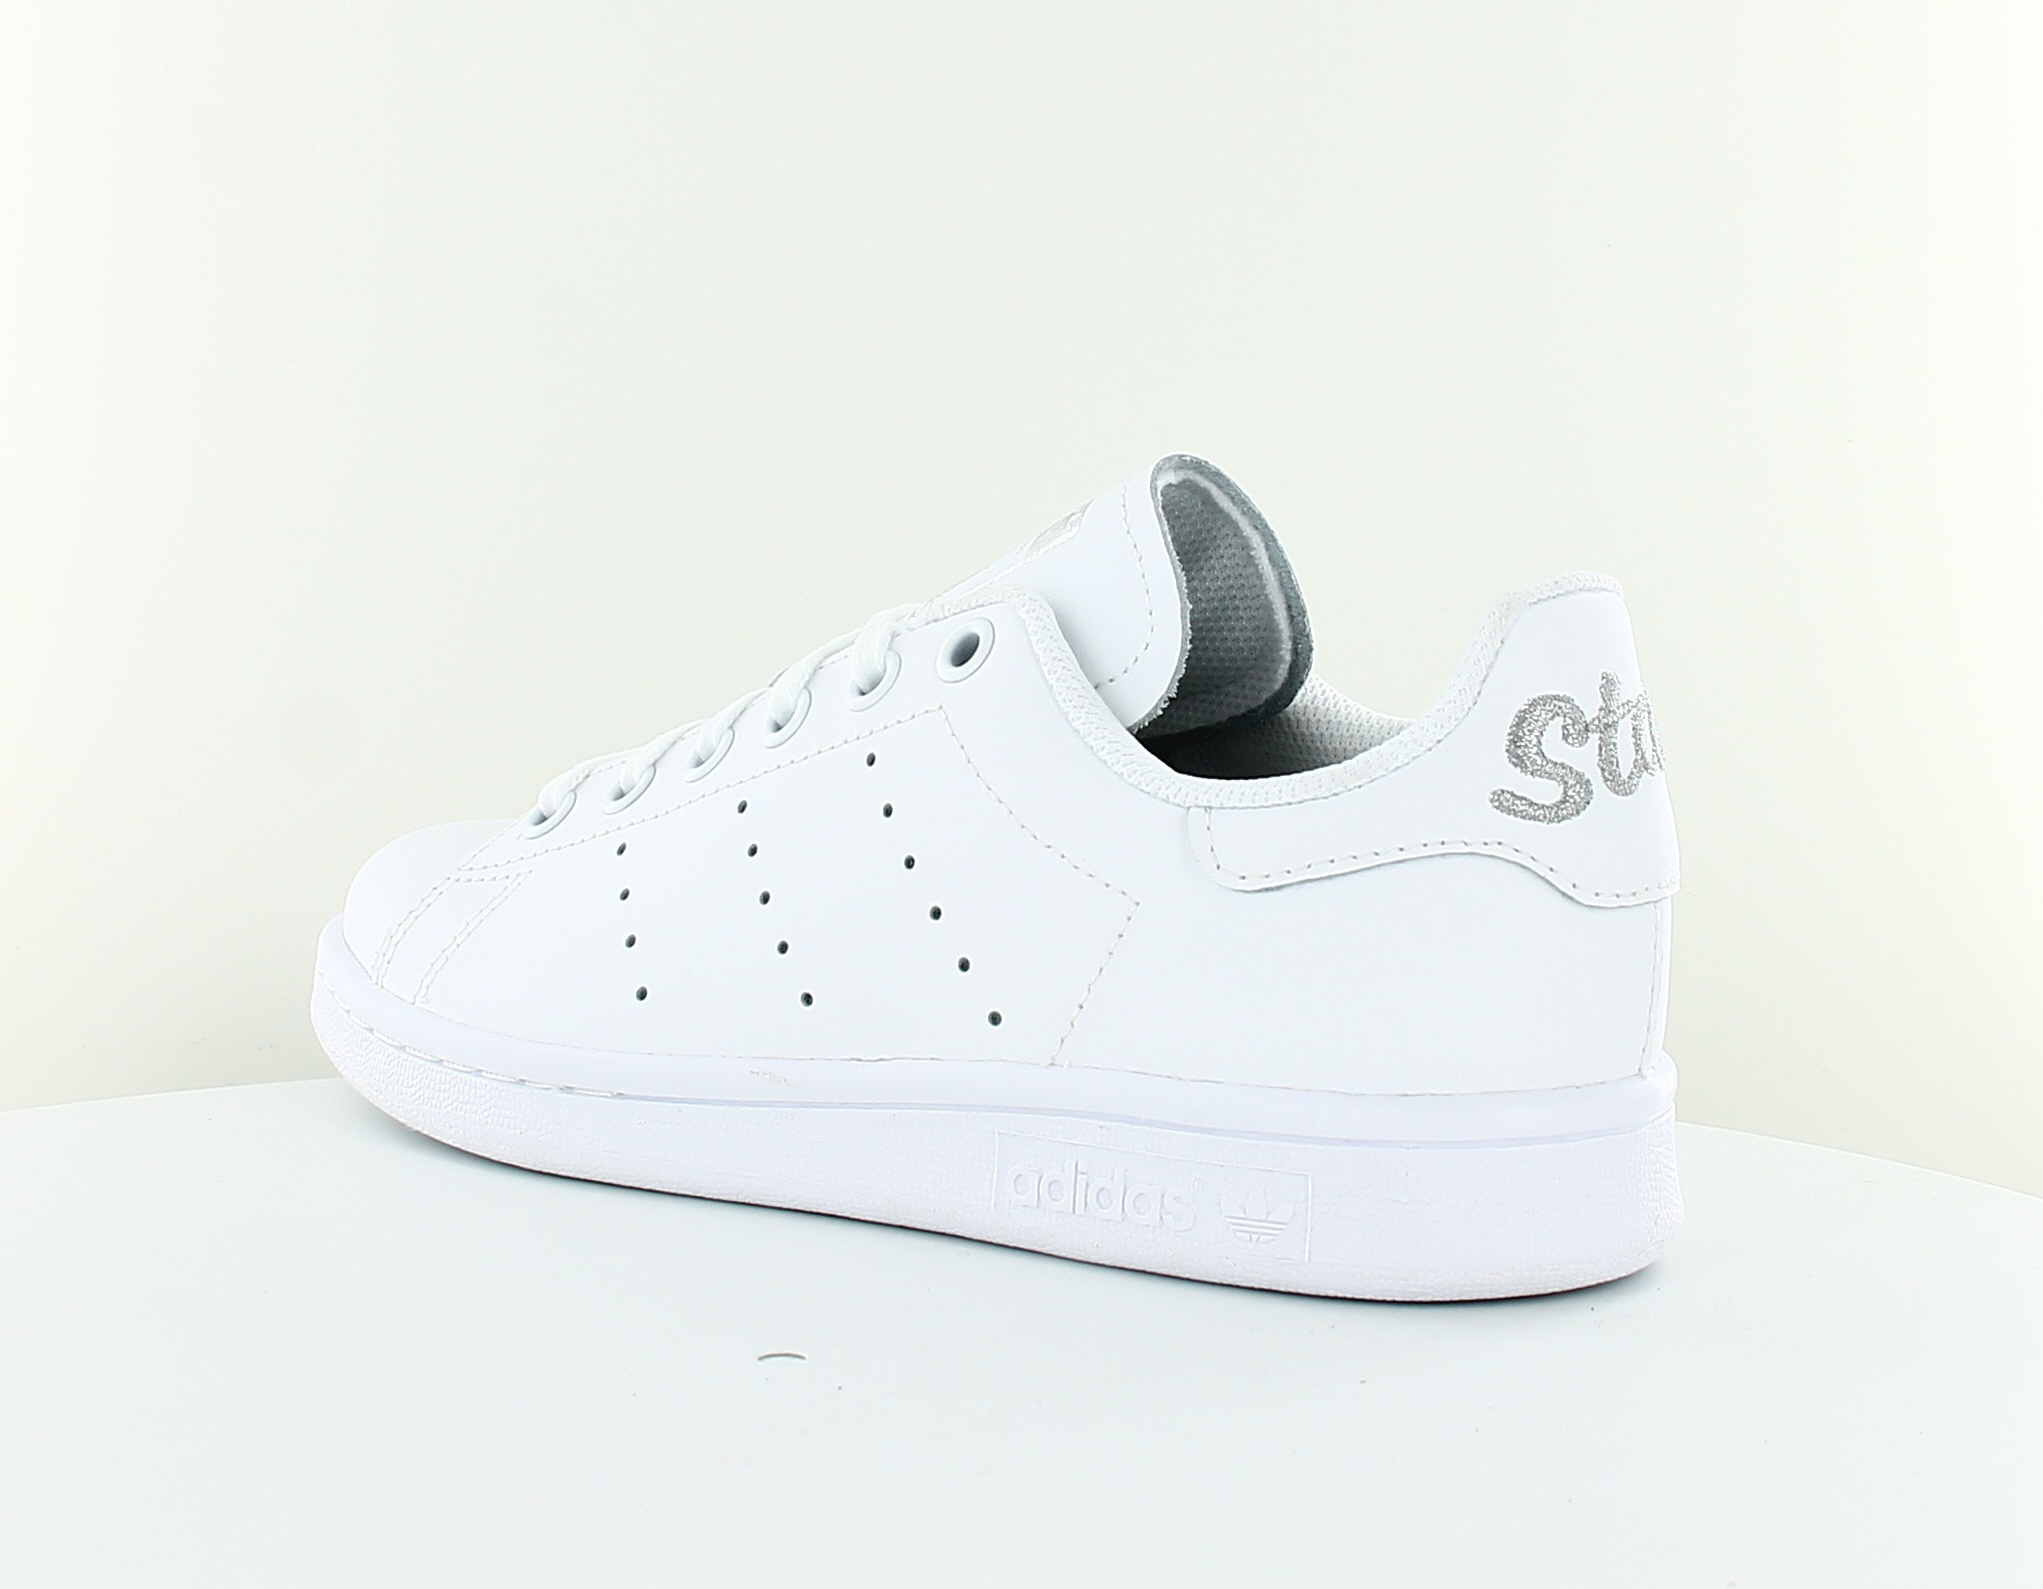 stan smith homme argent